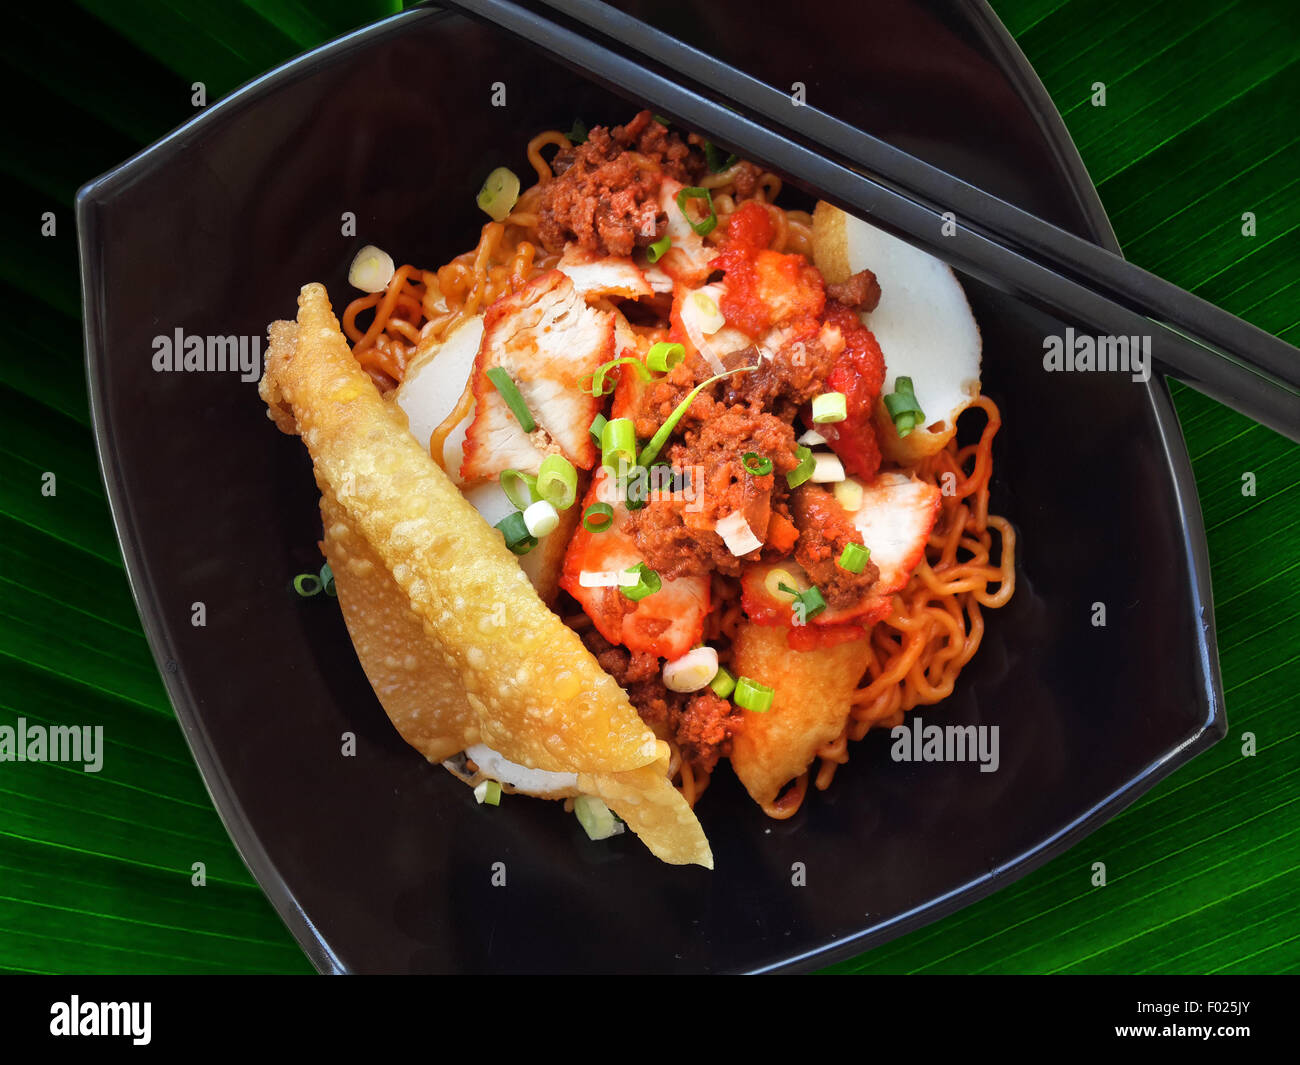 Bowl of Spicy chicken with noodles Stock Photo